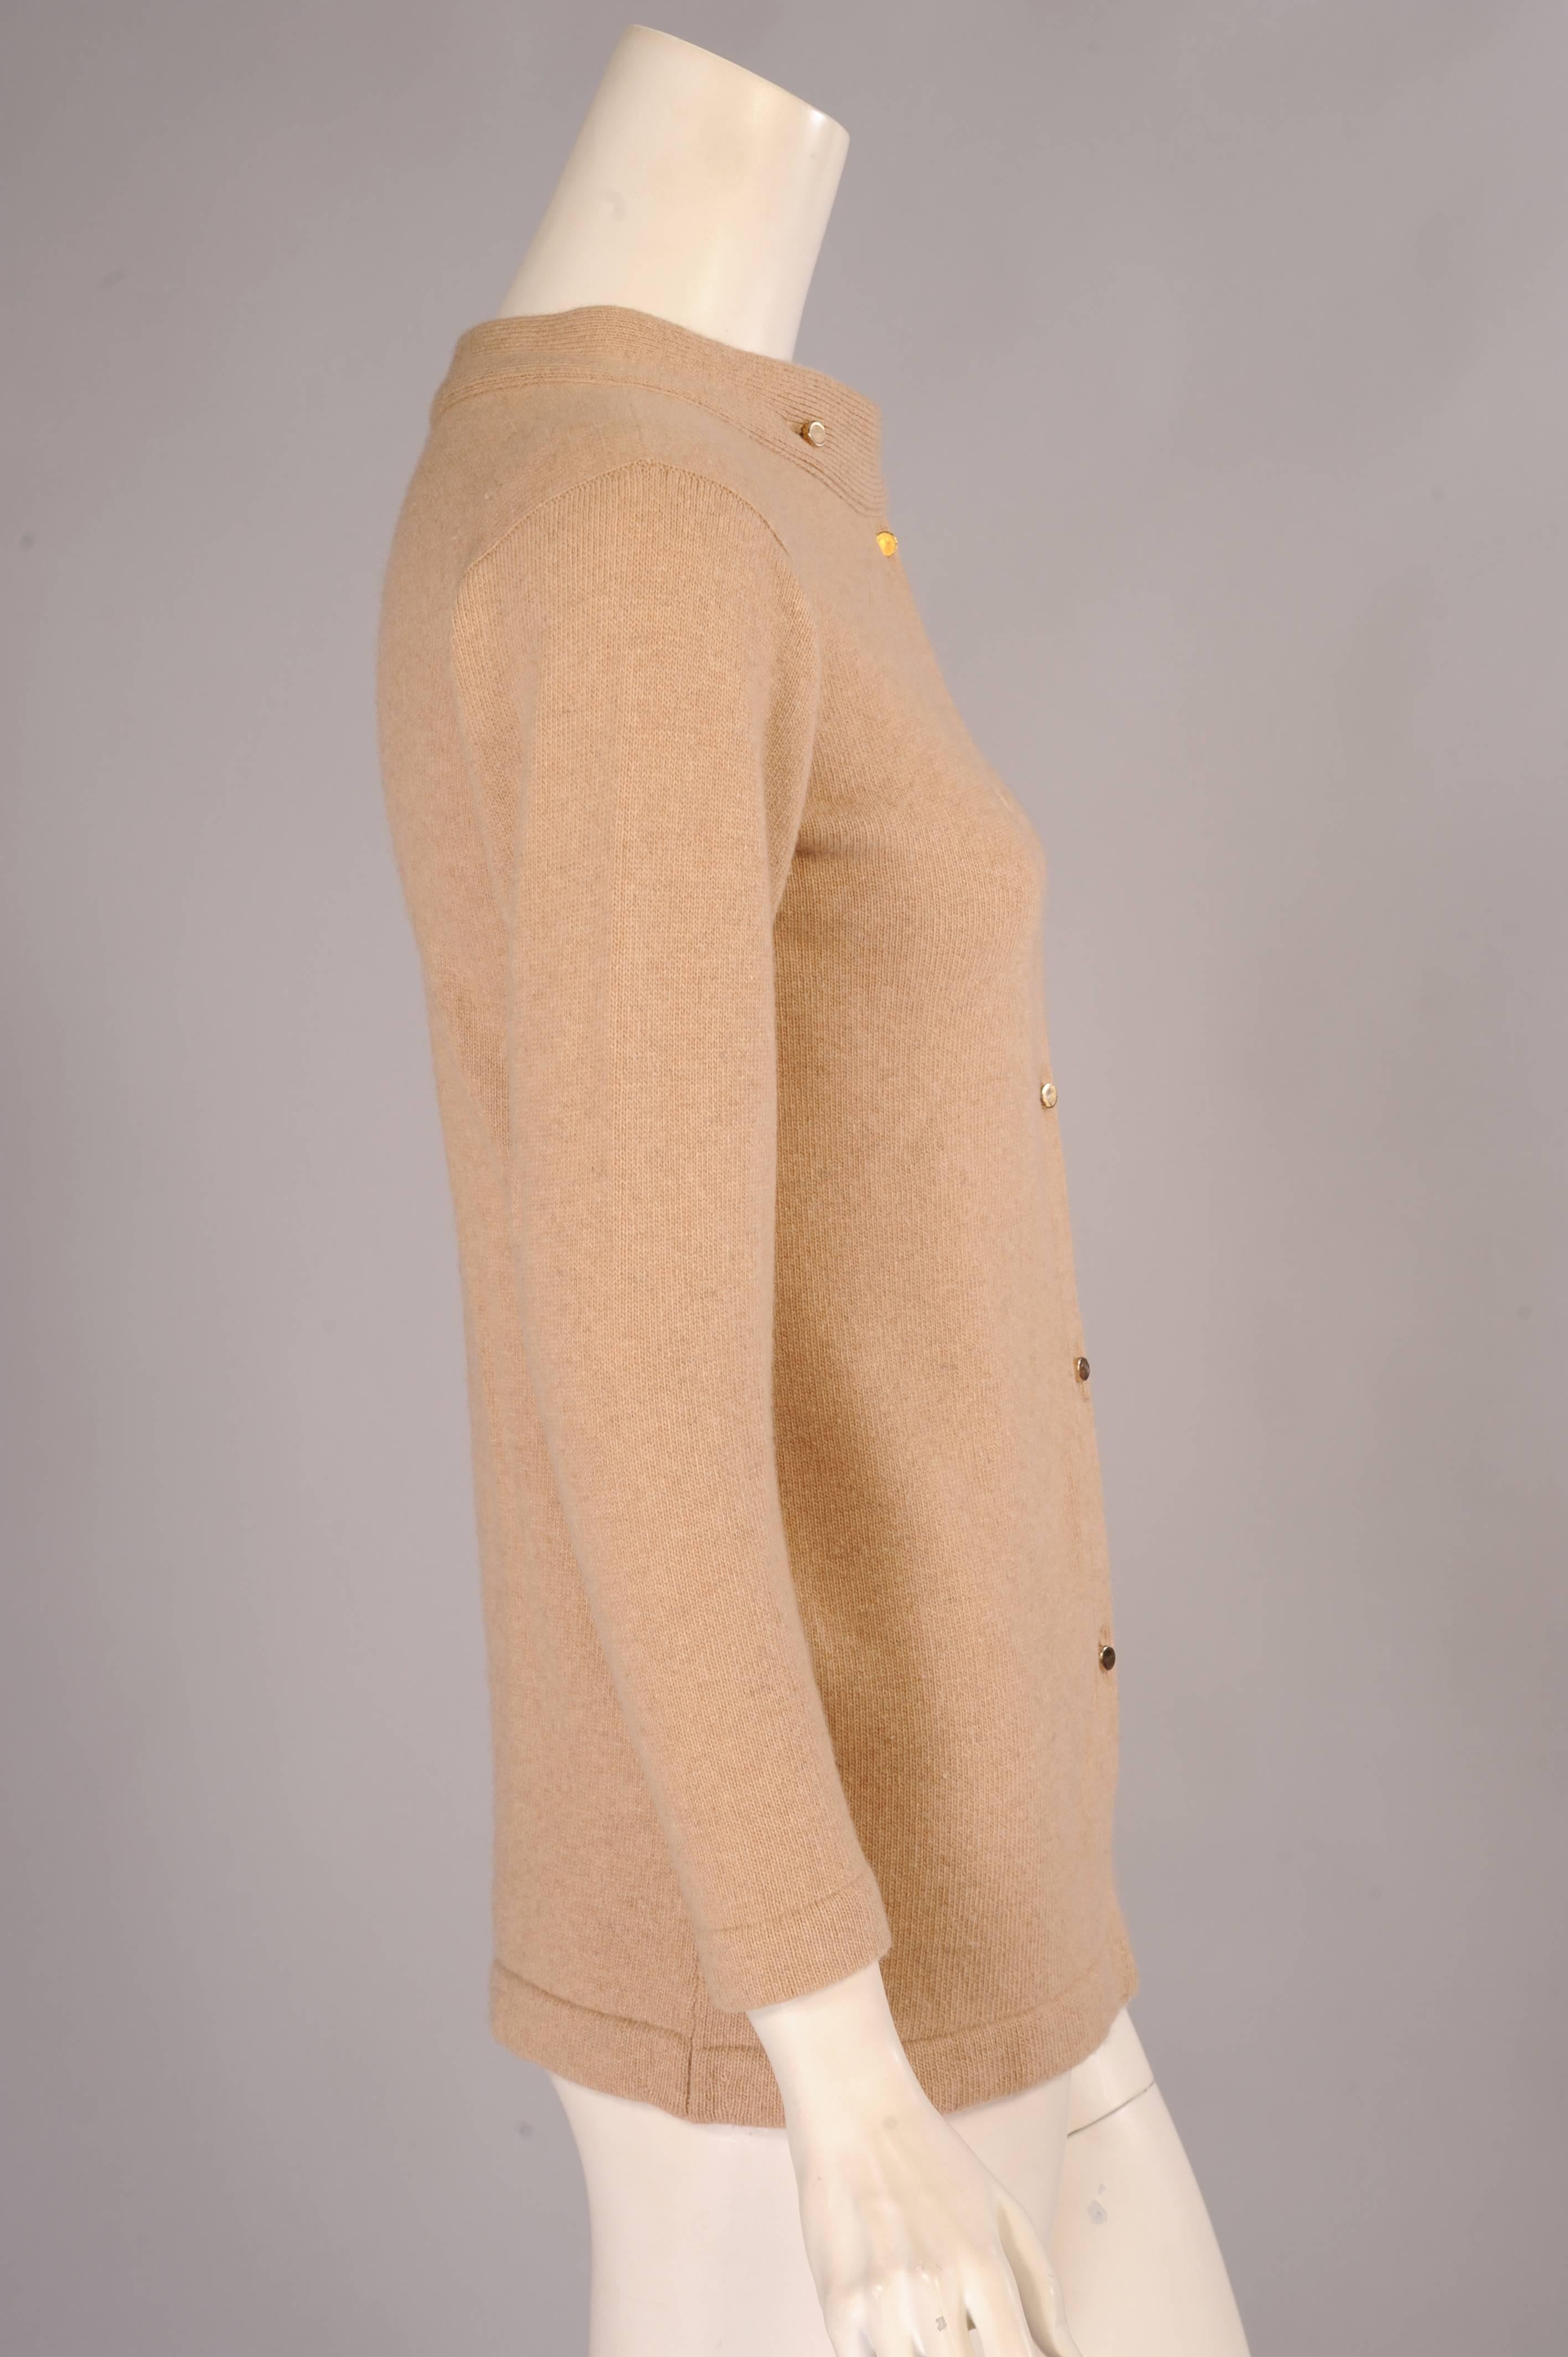 Natural Scottish Cashmere in at least a 4 ply thickness is used for this cardigan sweater from Bonnie Cashin. The long straight shape has a distinctive treatment at the neckline. The sweater has a stand up collar and two small gold toned buttons